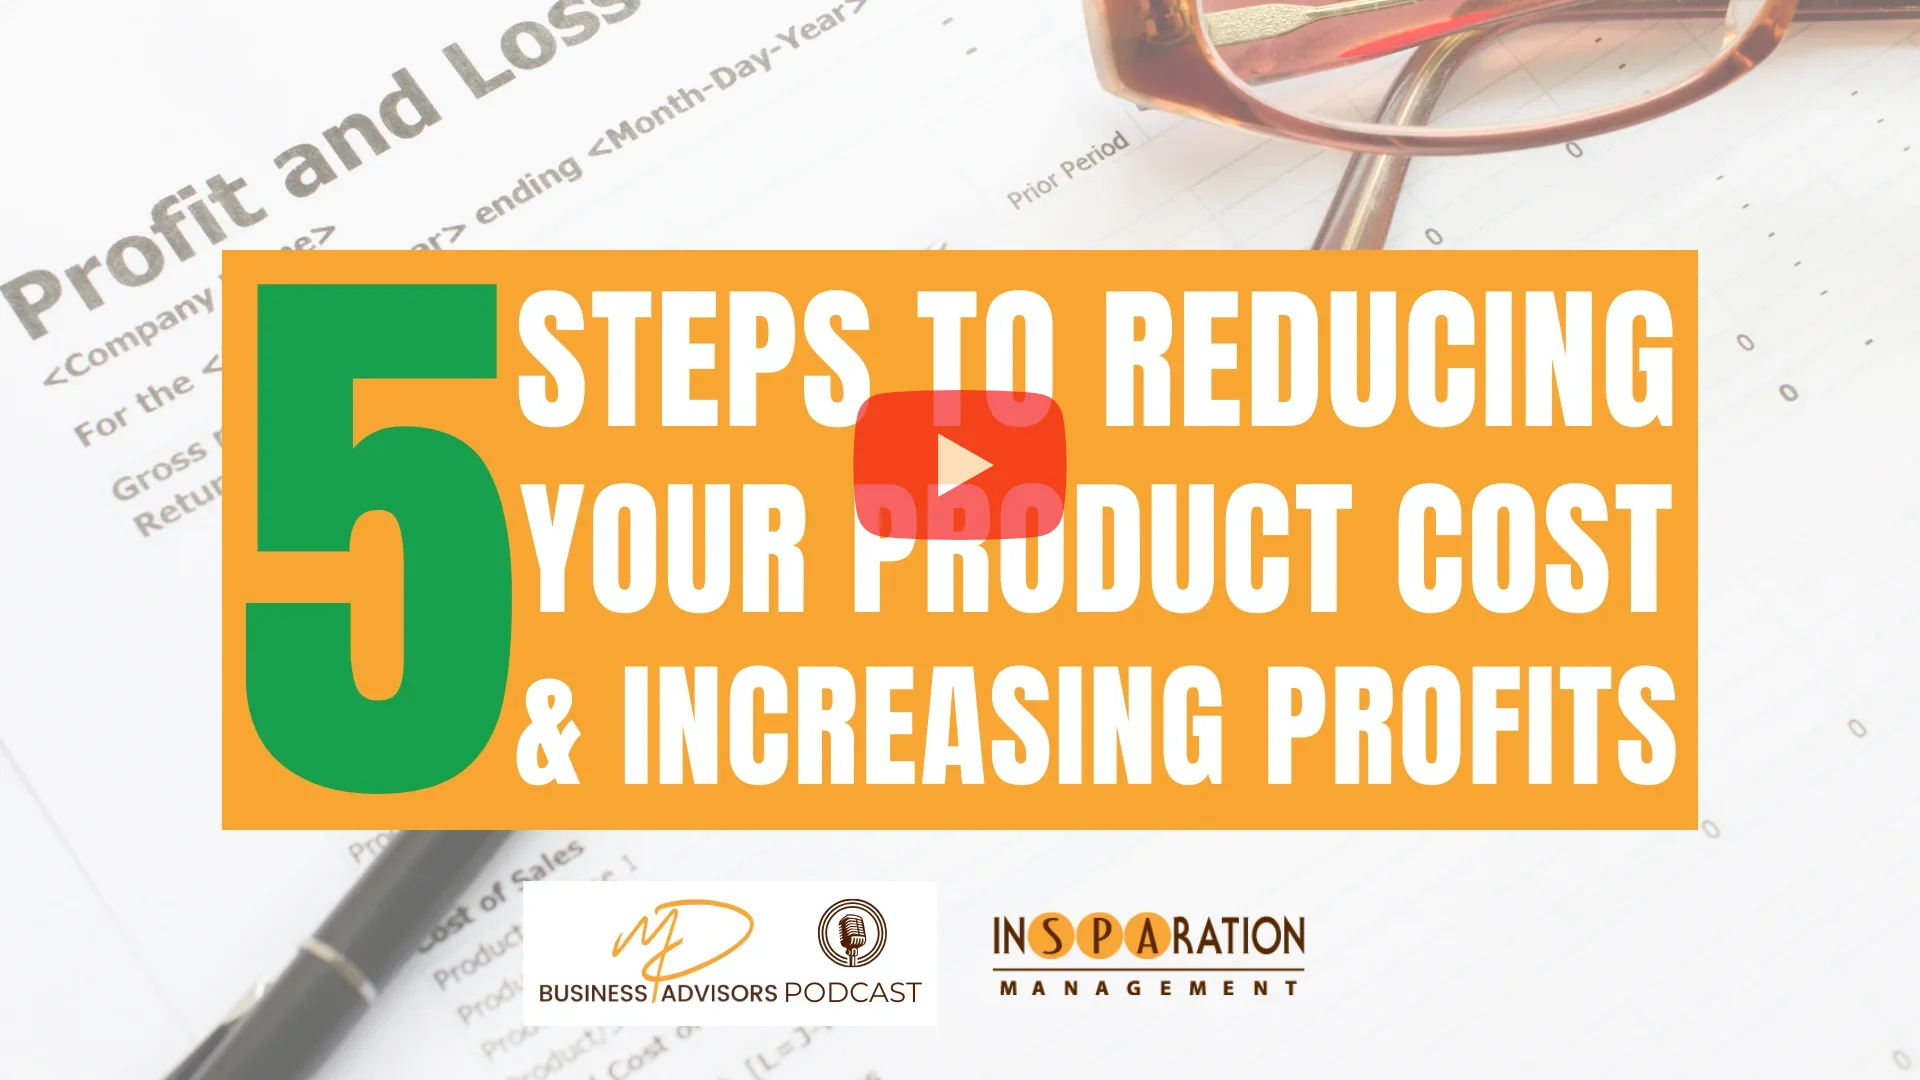 Five Steps To Reducing Your Product Cost & Increasing Profits